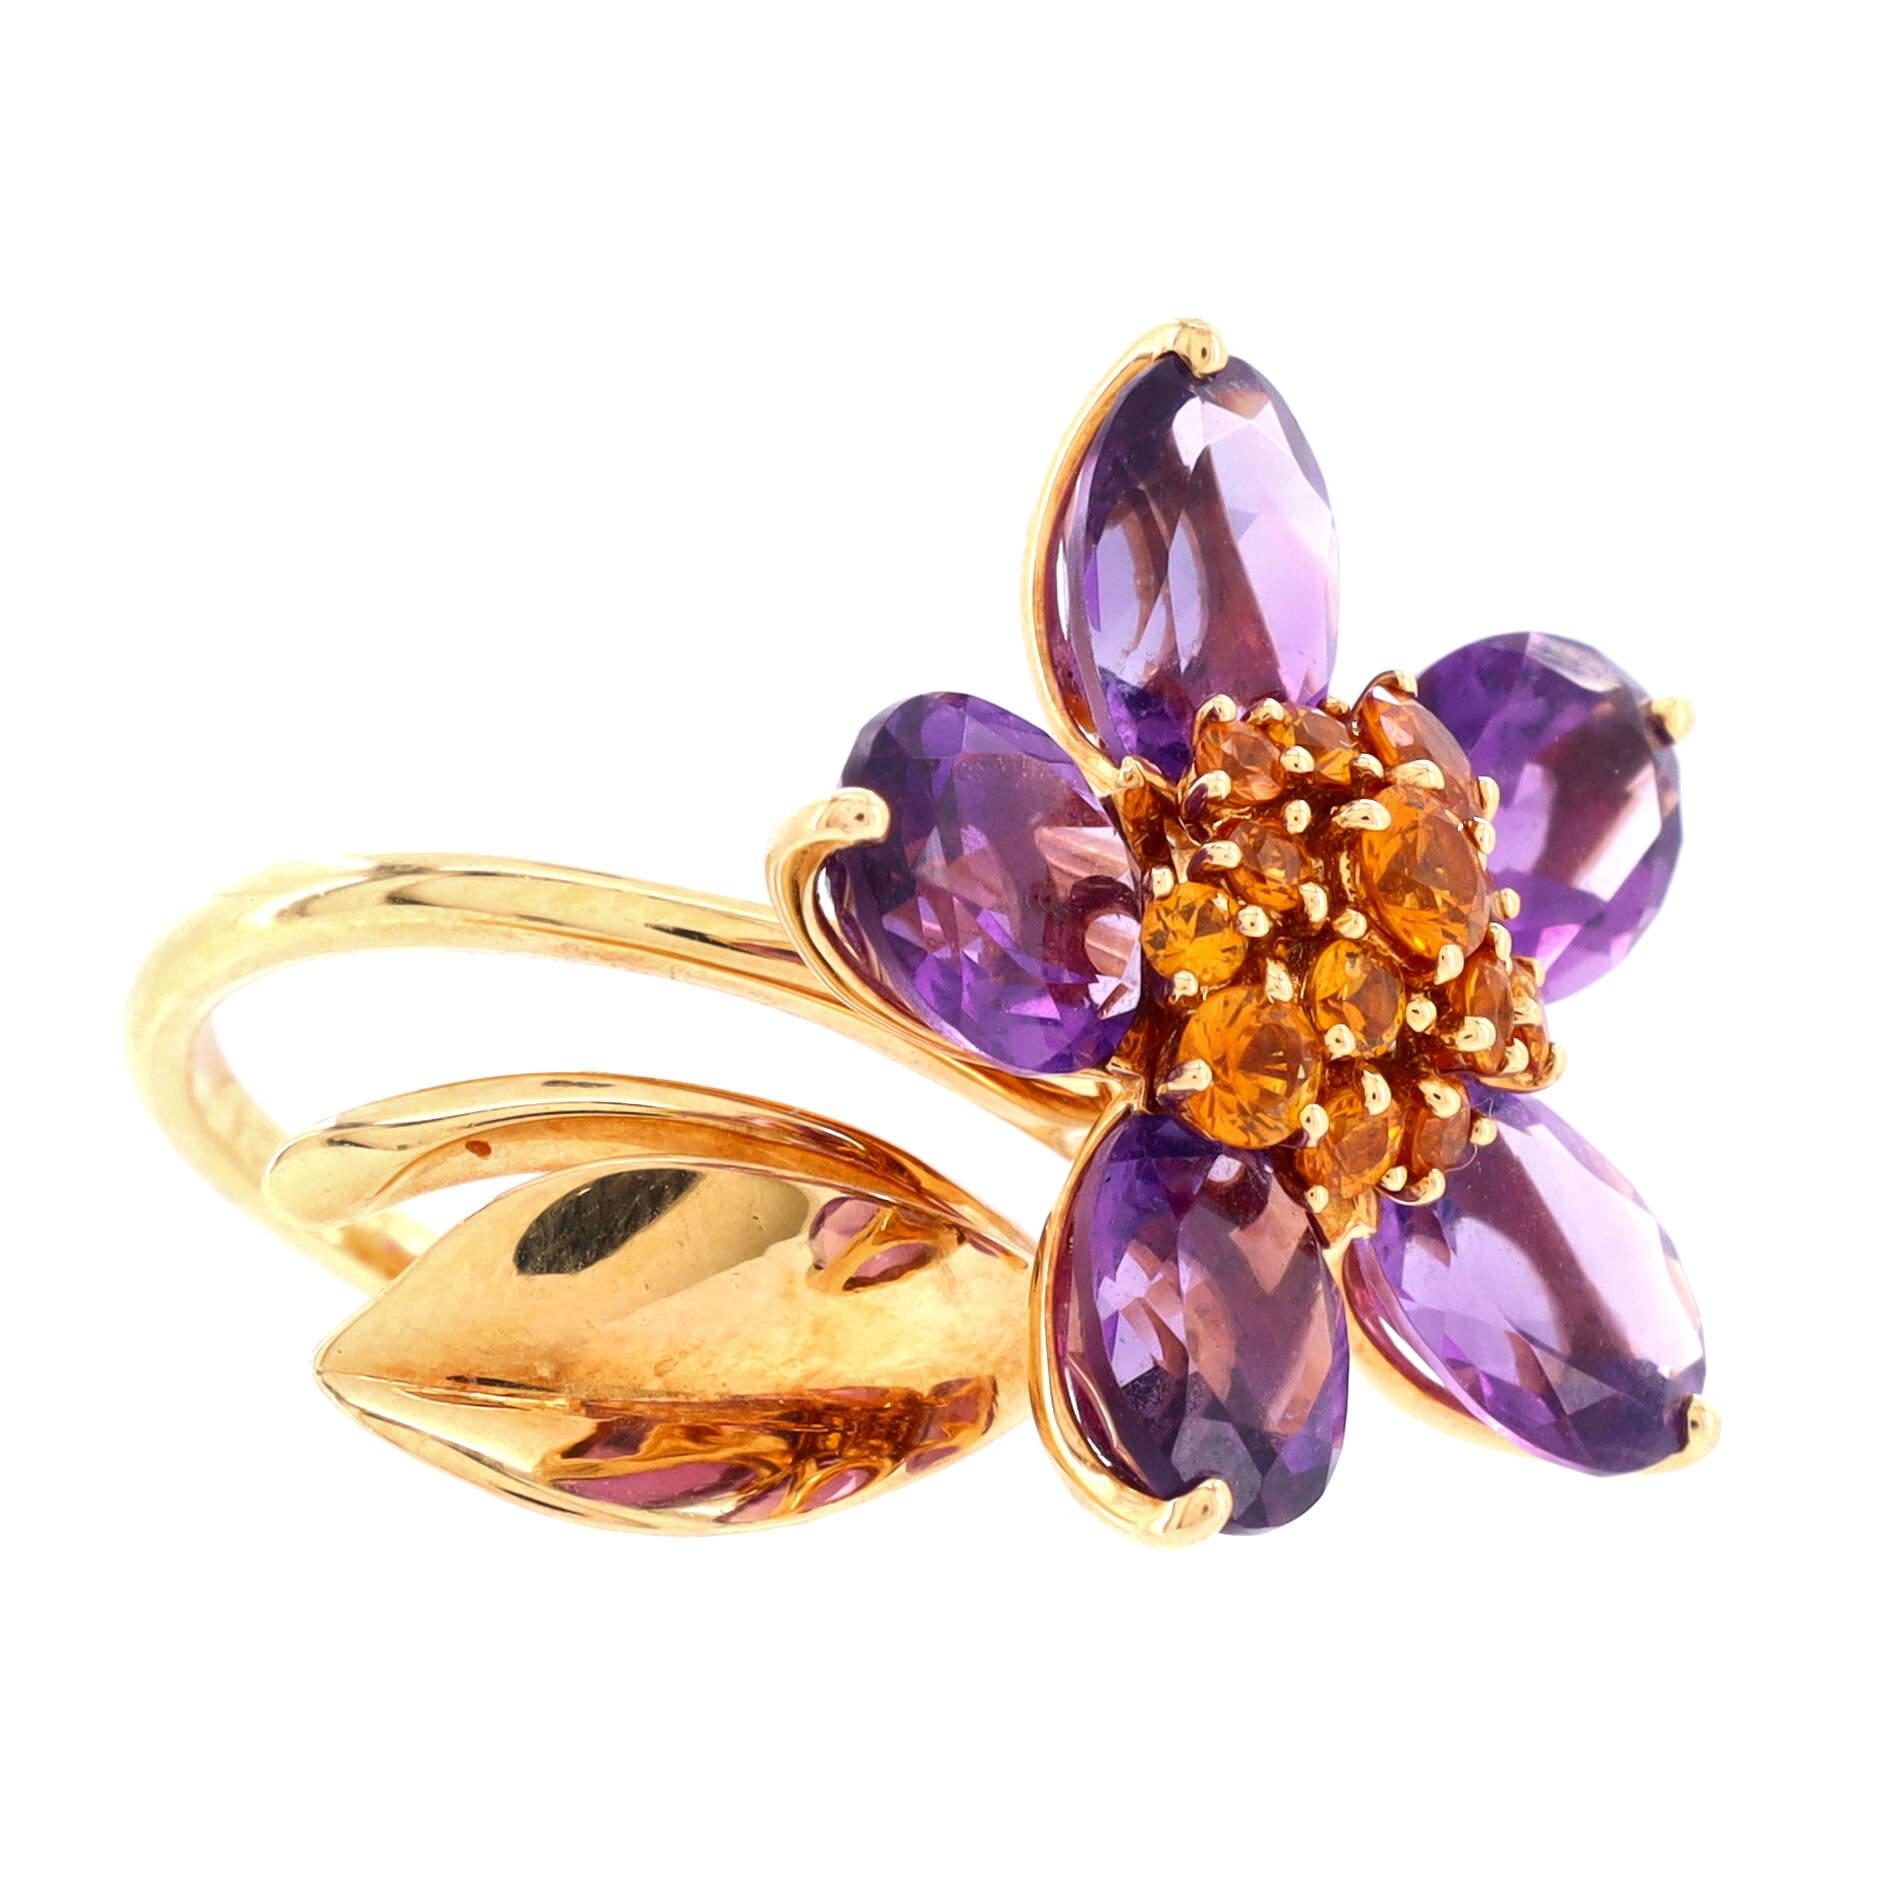 Condition: Great. Minor wear throughout. This ring is articulated flower that rotates.
Accessories: No Accessories
Measurements: Size: 6 - 52, Width: 1.95 mm
Designer: Van Cleef & Arpels
Model: Hawaii Flower Ring 18K Yellow Gold with Amethyst and